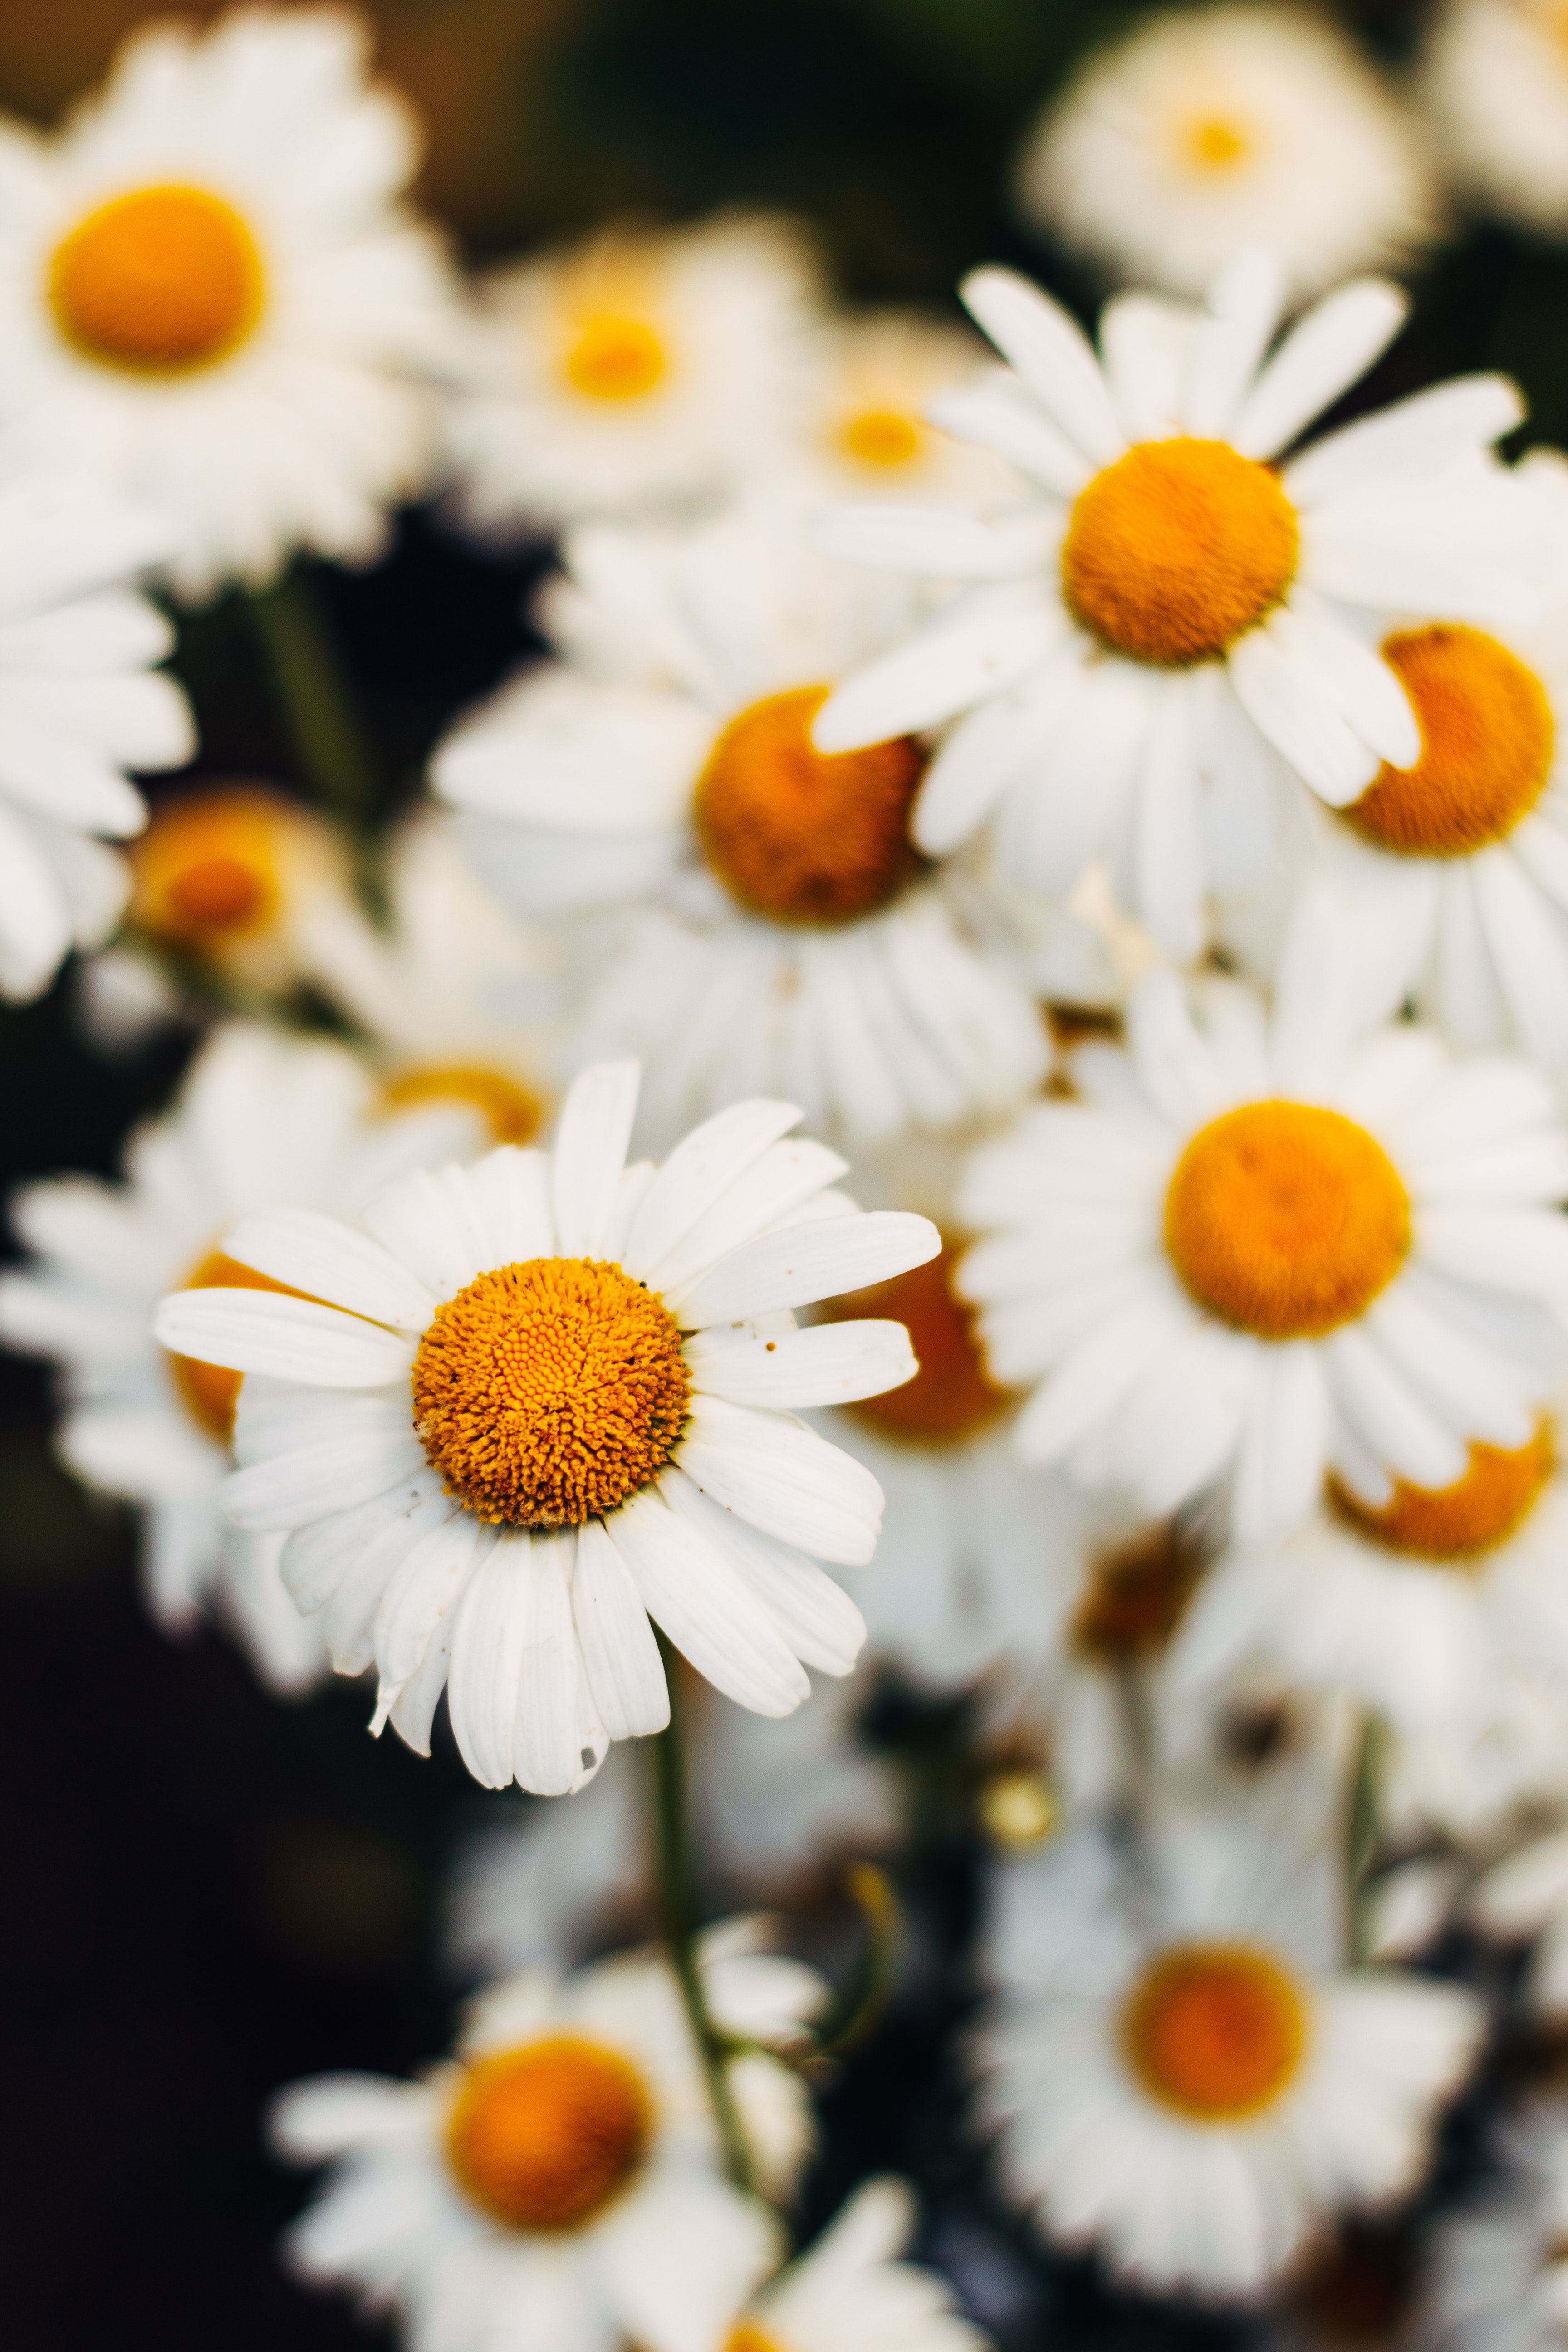 A close-up photo of white daisy flowers